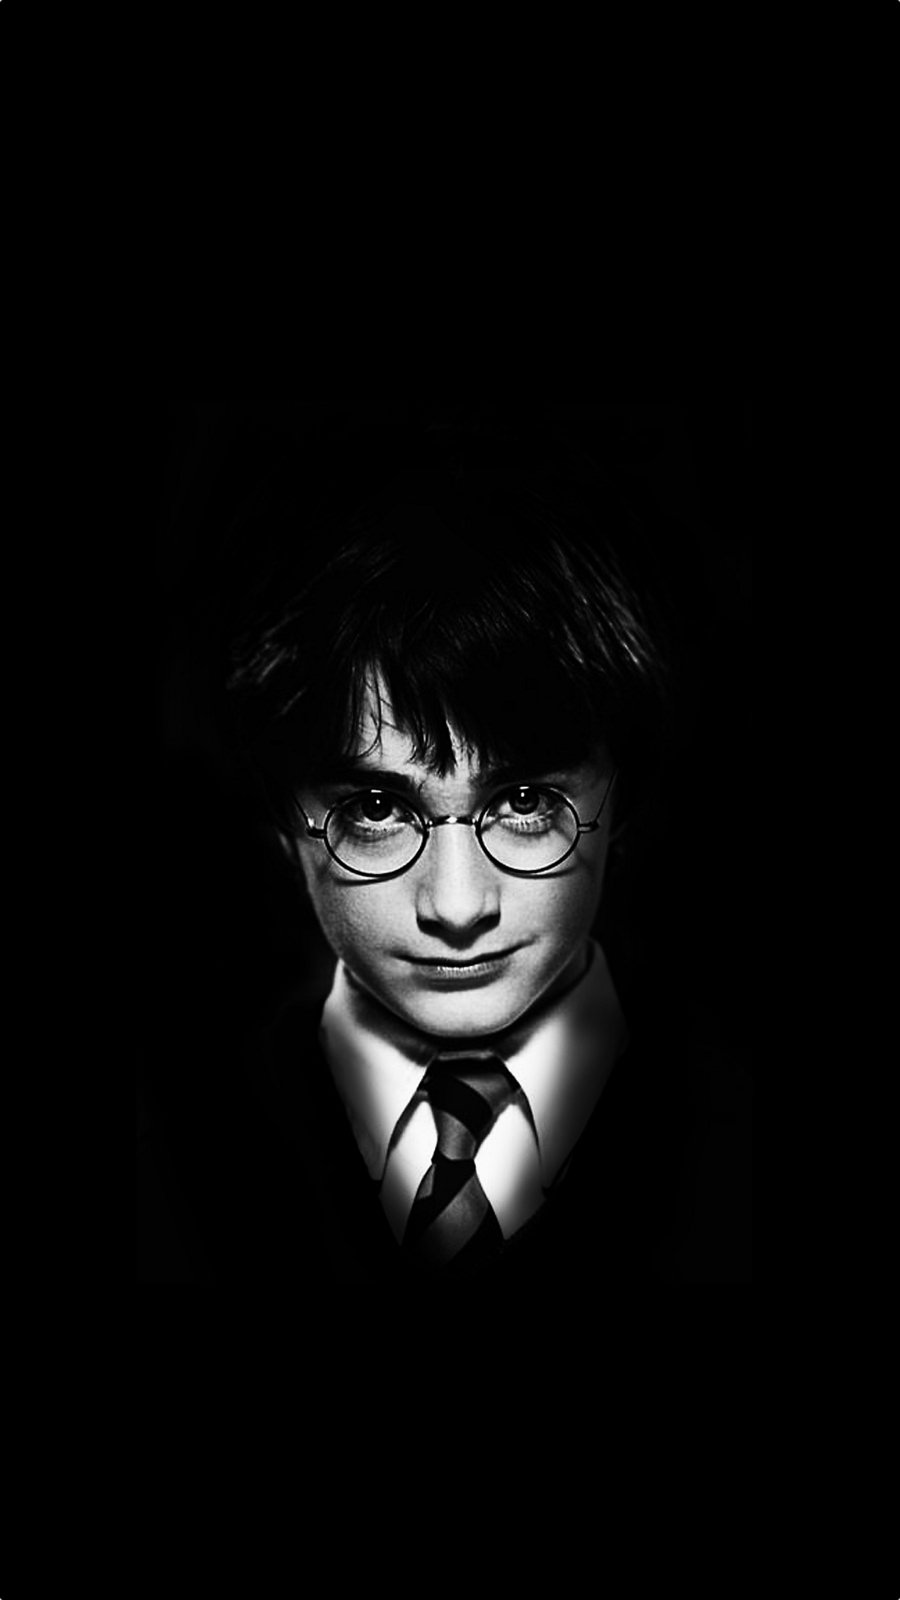 iphone 6 Plus Harry Potter Wallpaper Flickr   Photo Sharing